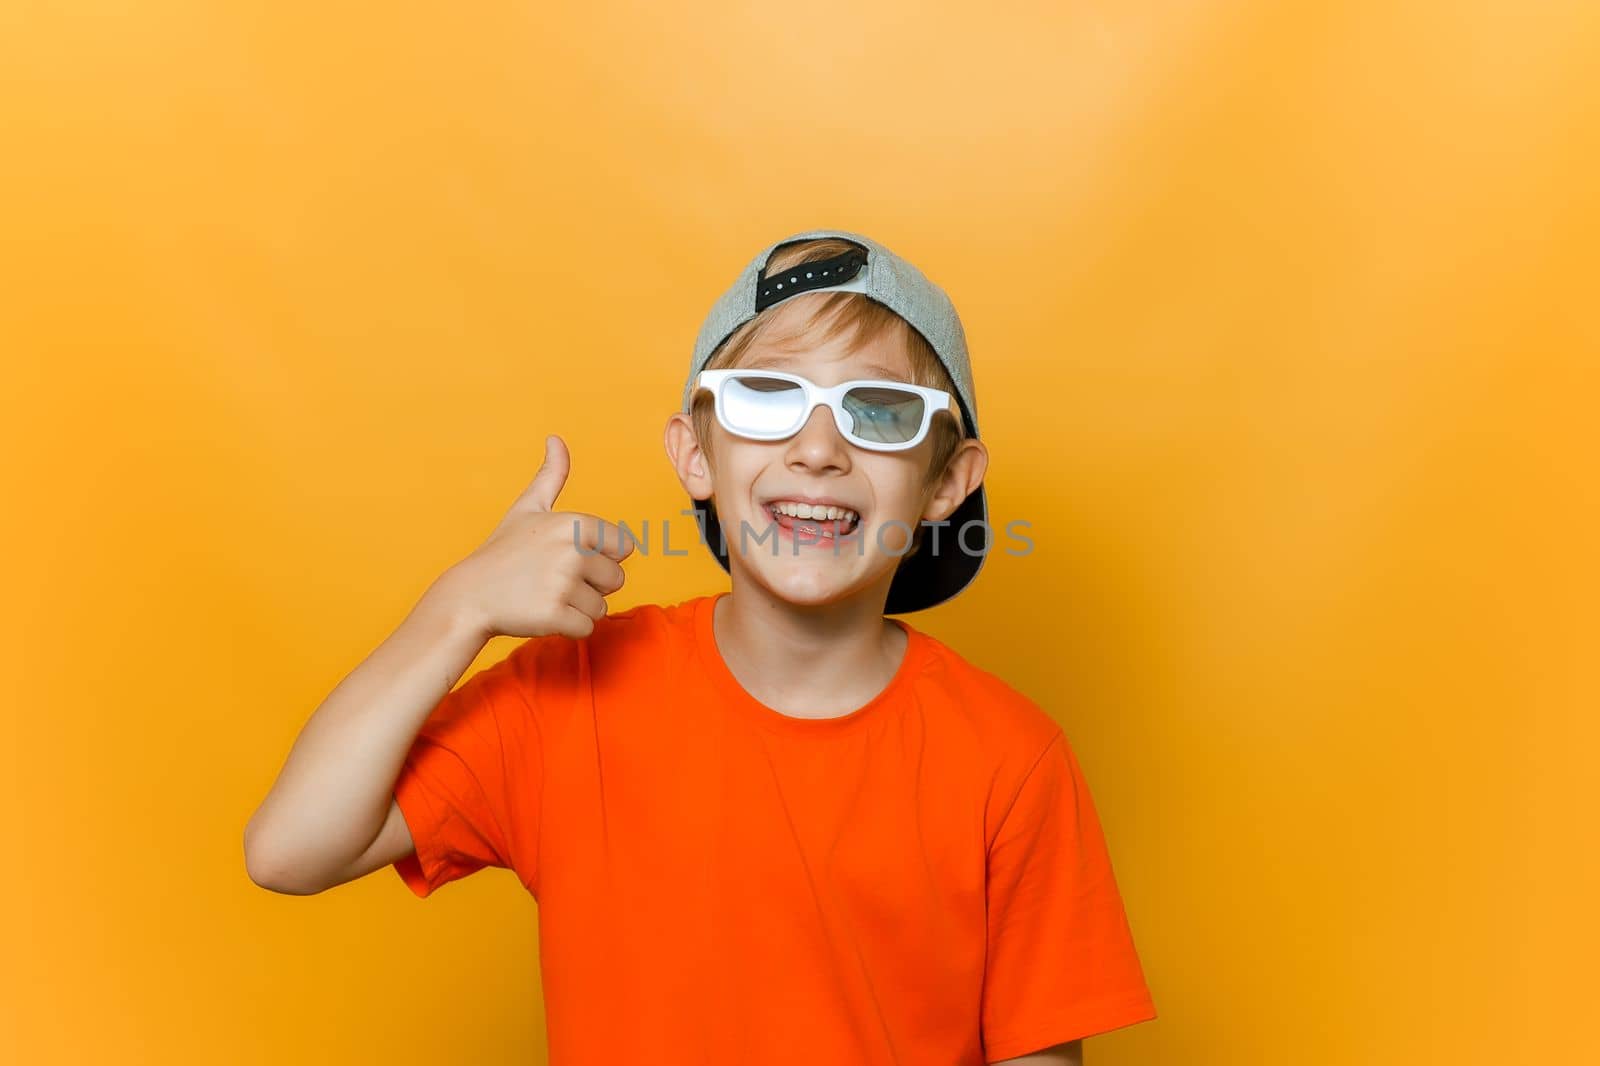 a child in a cap and glasses for watching movies shows a thumbs up and laughs merrily by RomanChoknadii